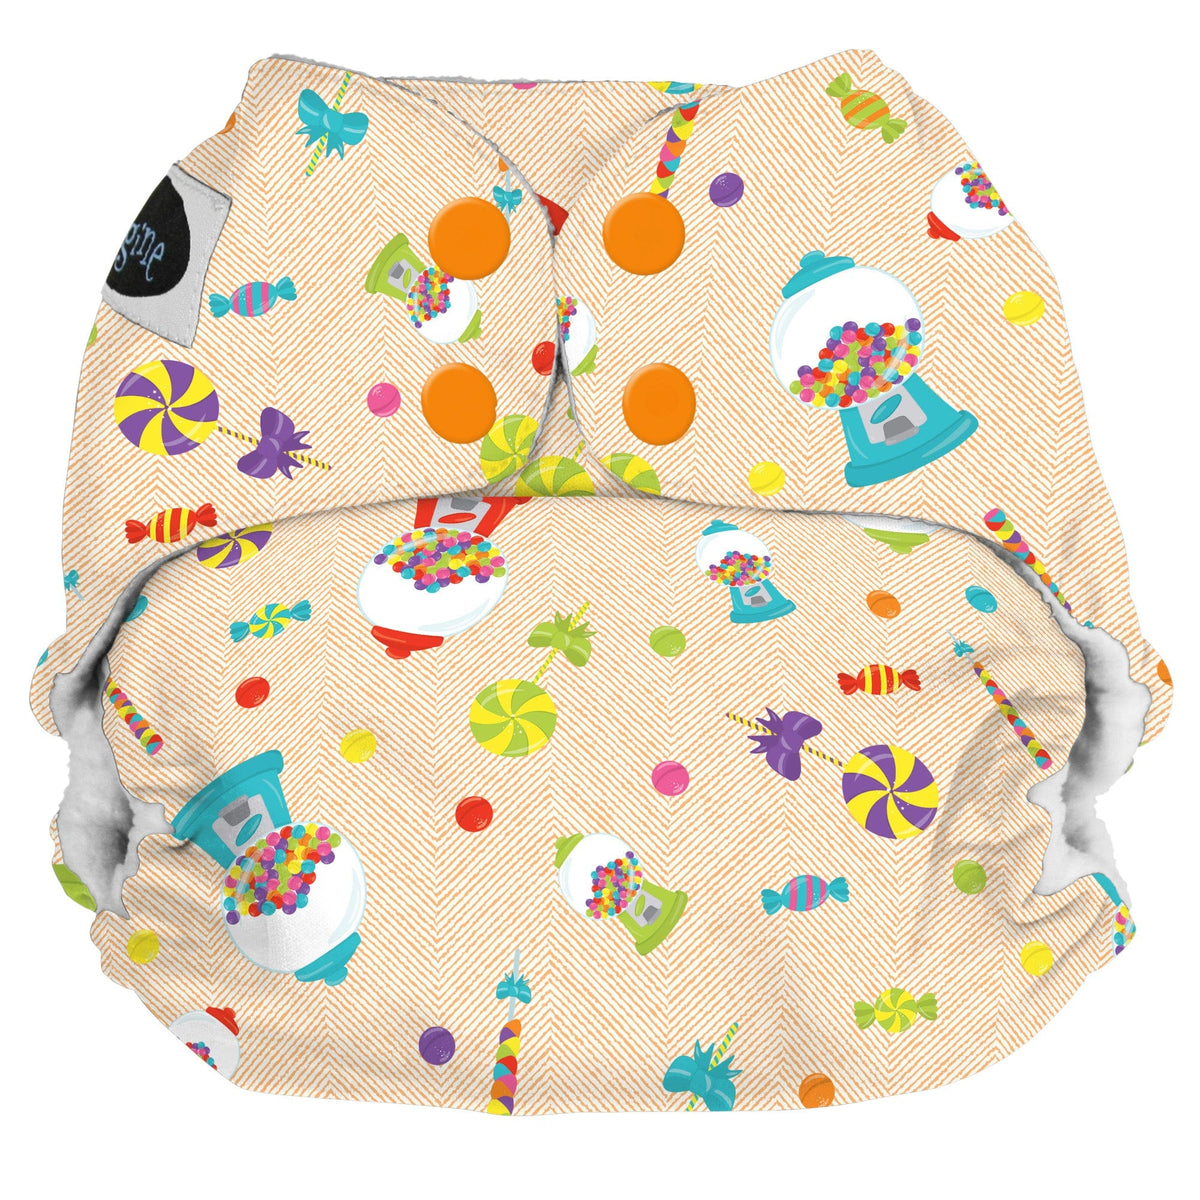 Buy Bdiapers Hybrid Nappy - 1 Washable Cloth Diaper Cover, 30